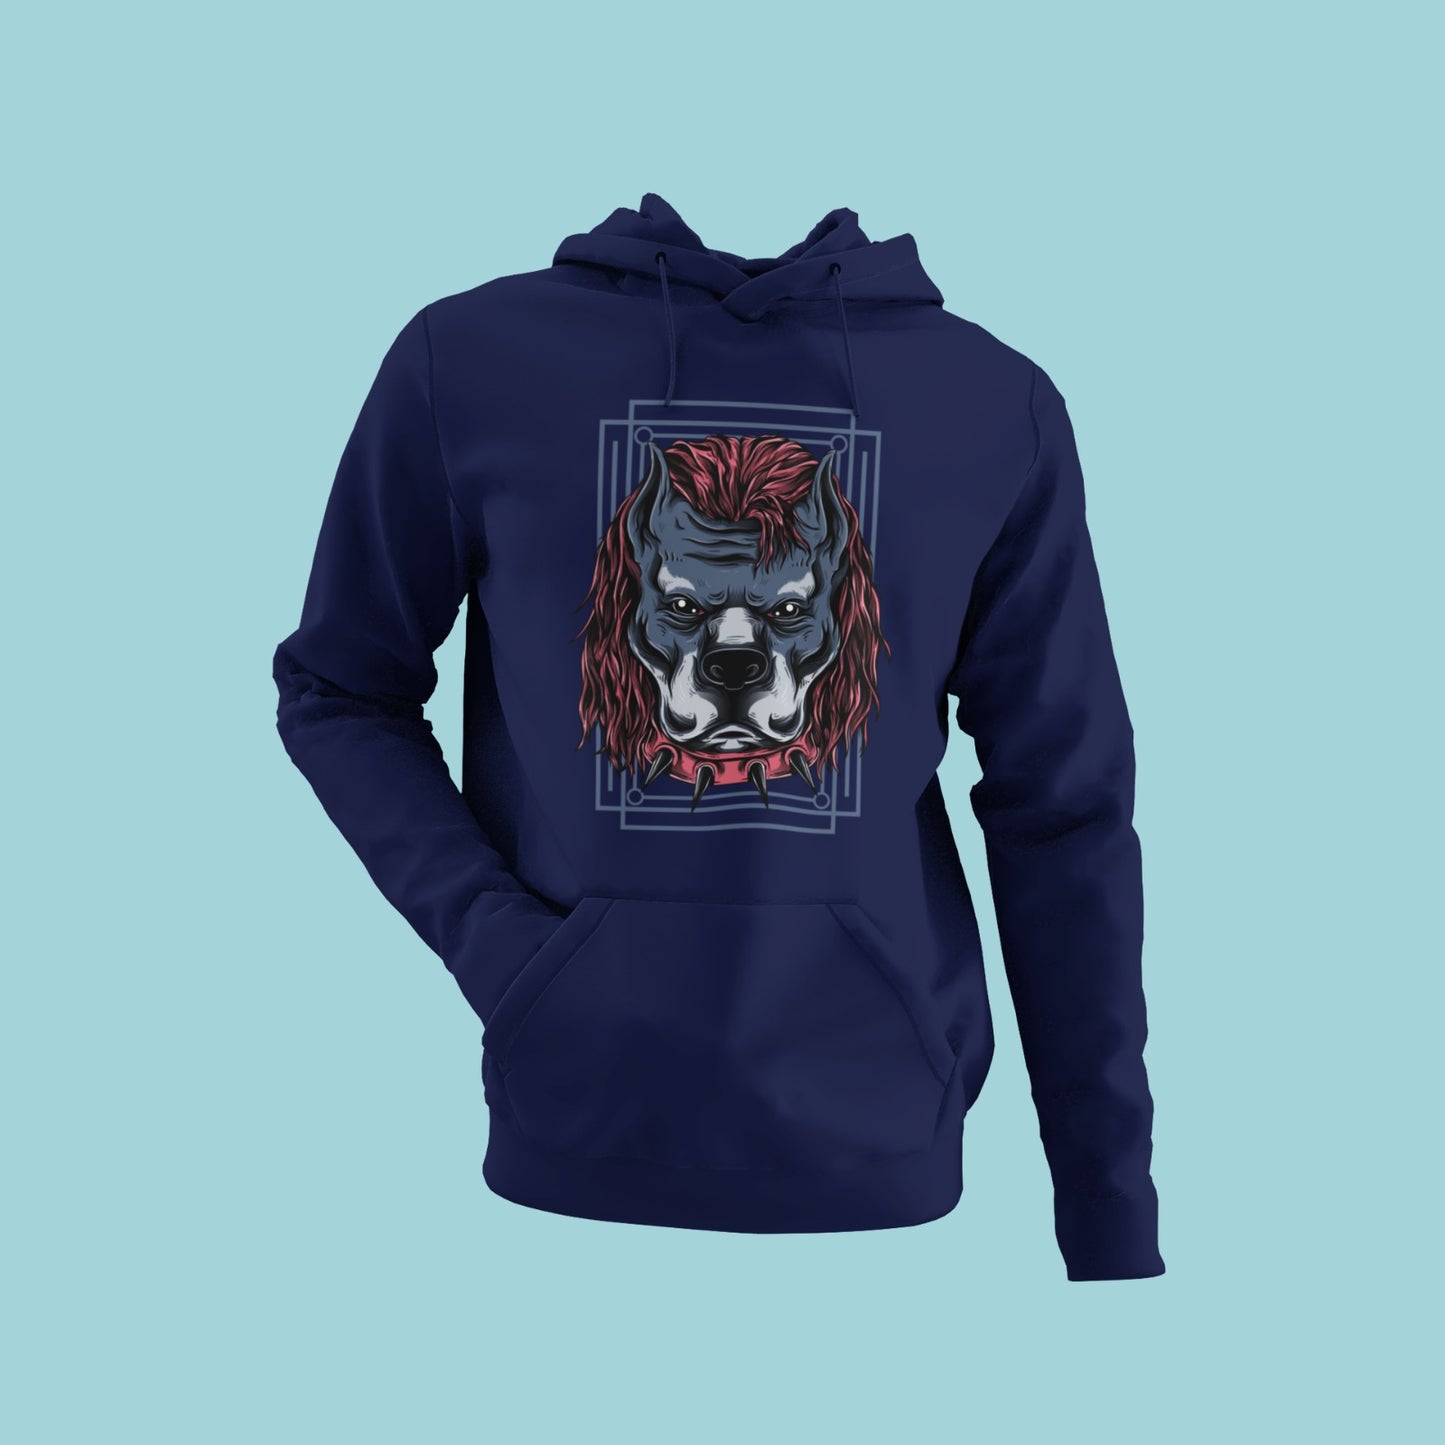 Get ready to unleash your fierce side with this navy blue hoodie featuring a menacing grey-blue bulldog face with a spiky collar and flowing red hair like a lion's mane. Perfect for those who aren't afraid to make a statement with their fashion choices.